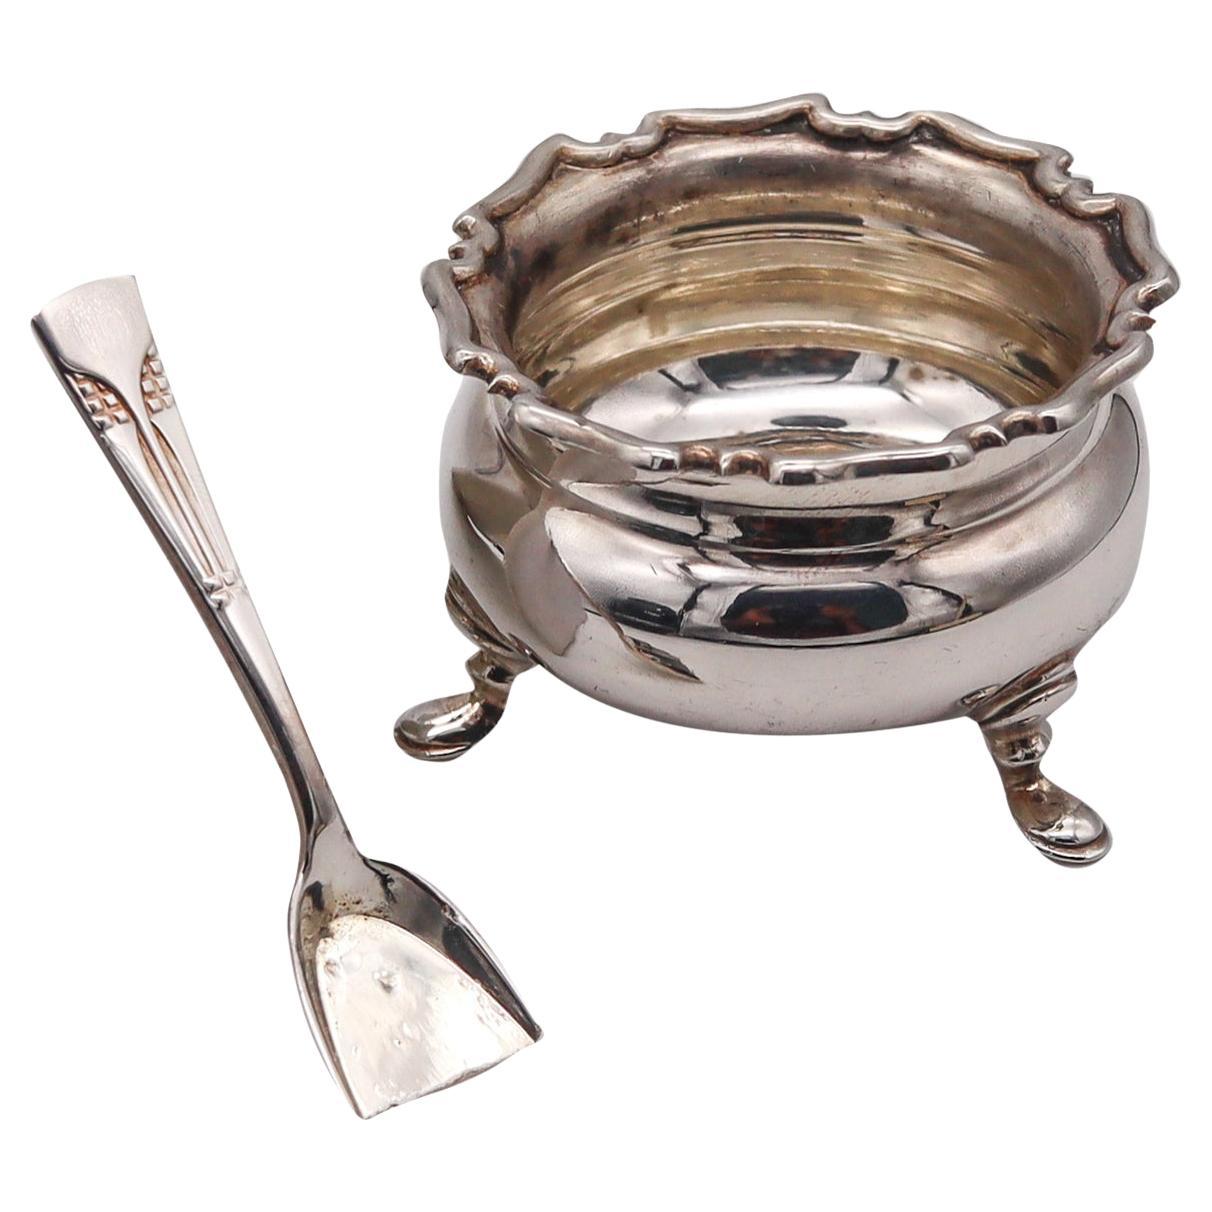 Atkin Brothers England 1912 Sheffield Salt Cellar with Spoon 925 Sterling Silver